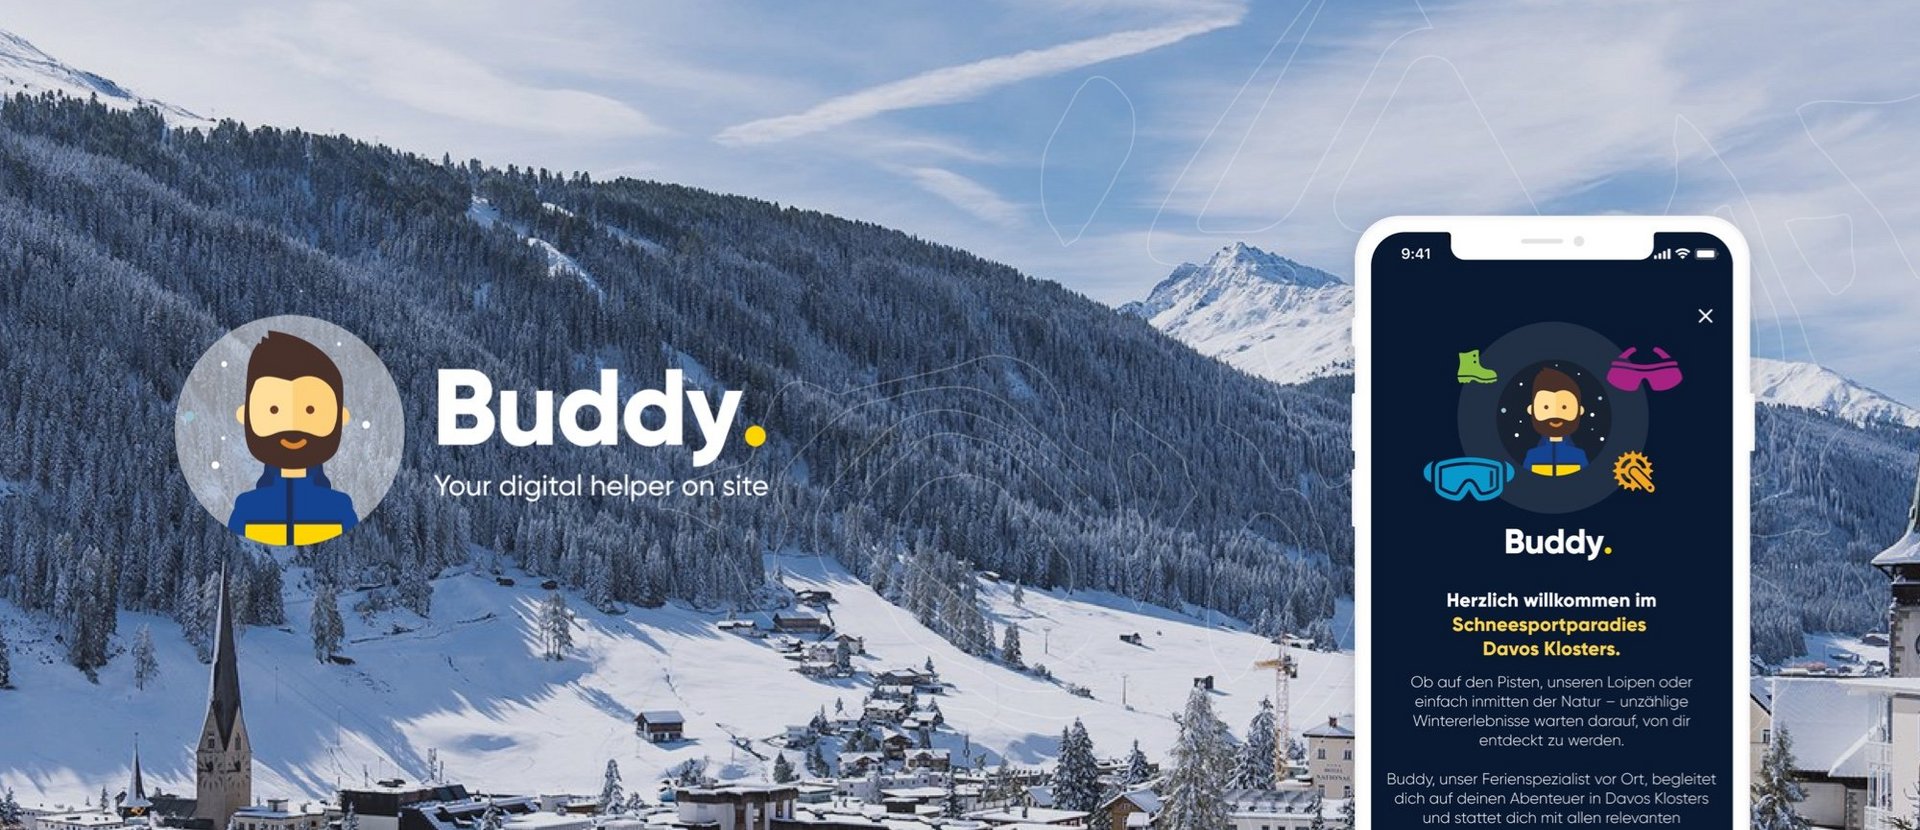 Davos Klosters Buddy